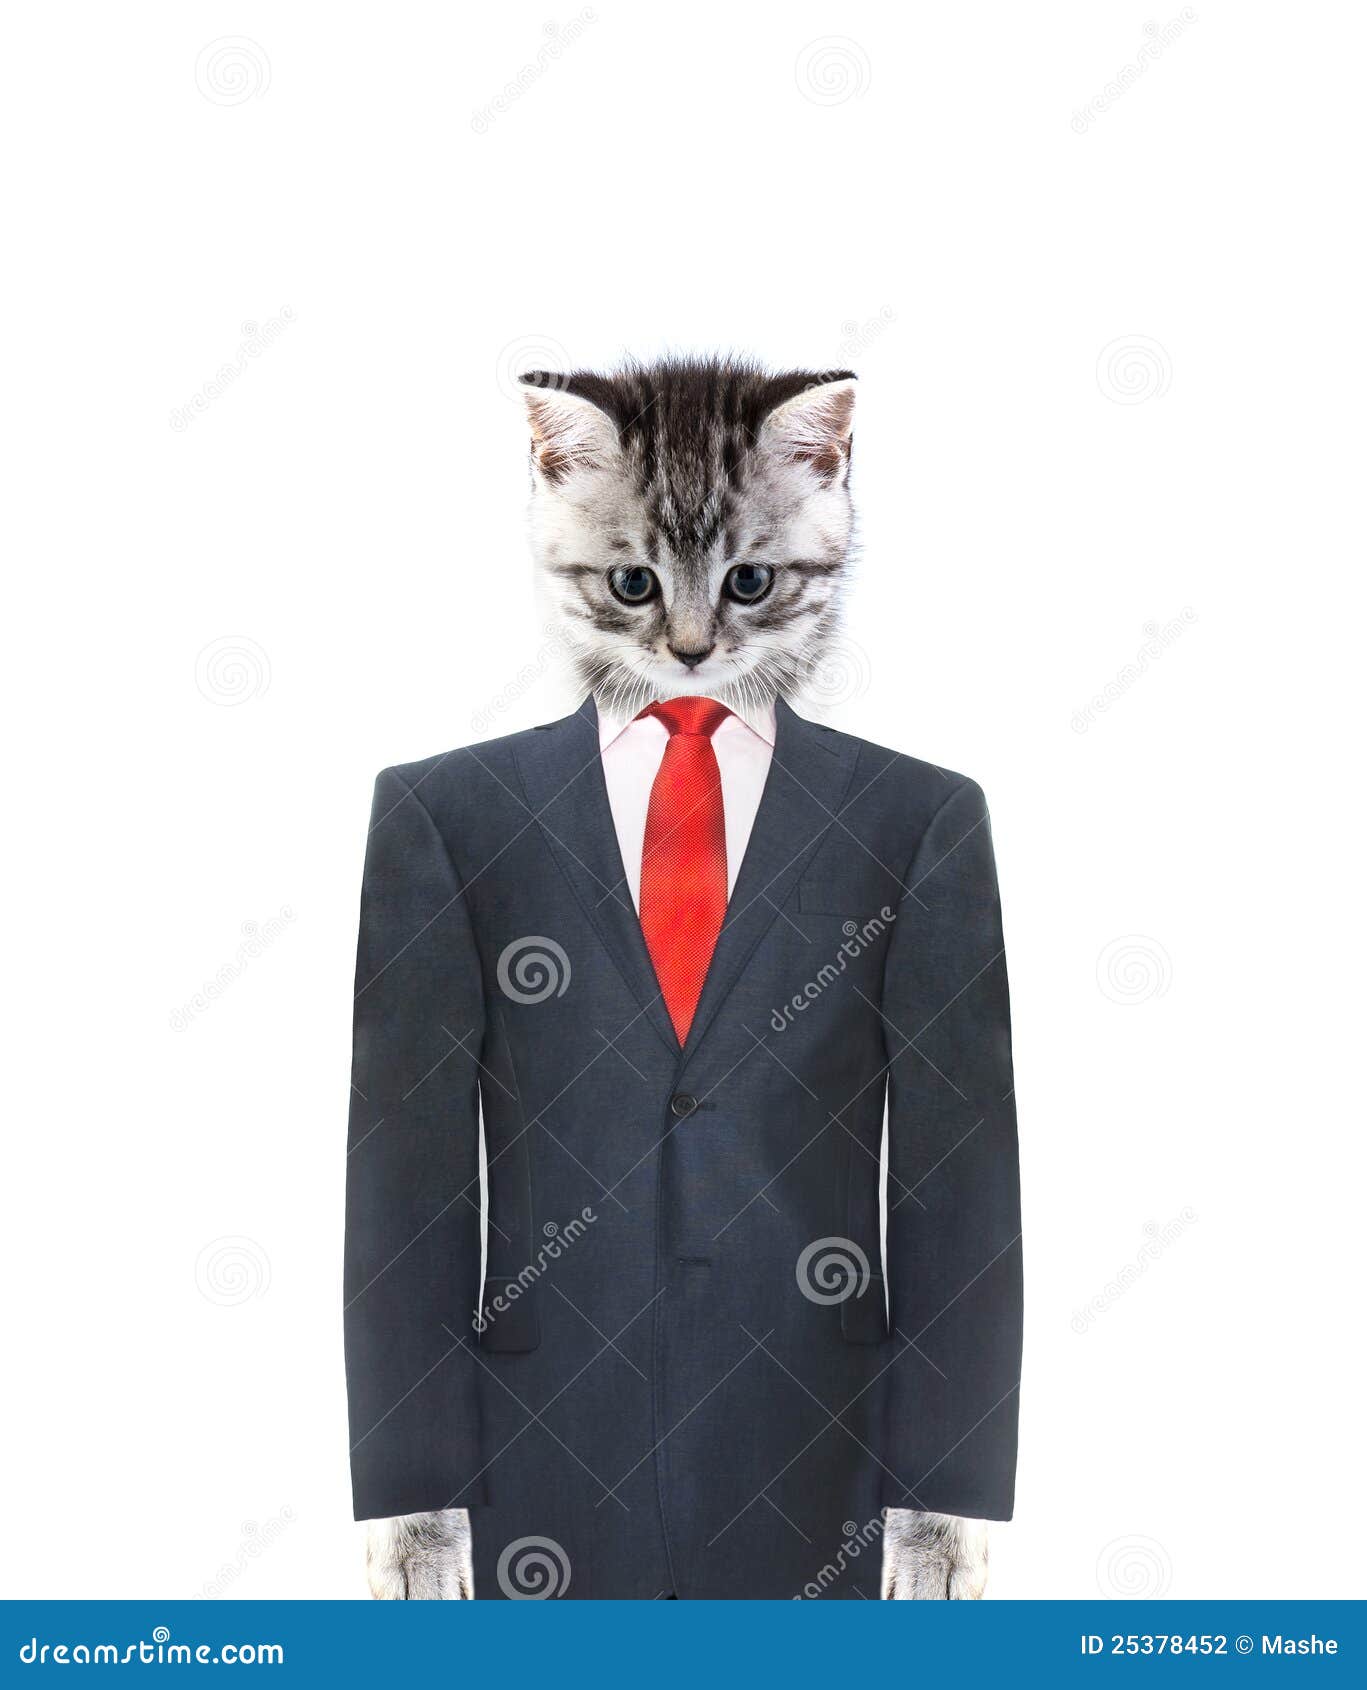 Cat in a suit stock photo. Image of working, business - 25378452